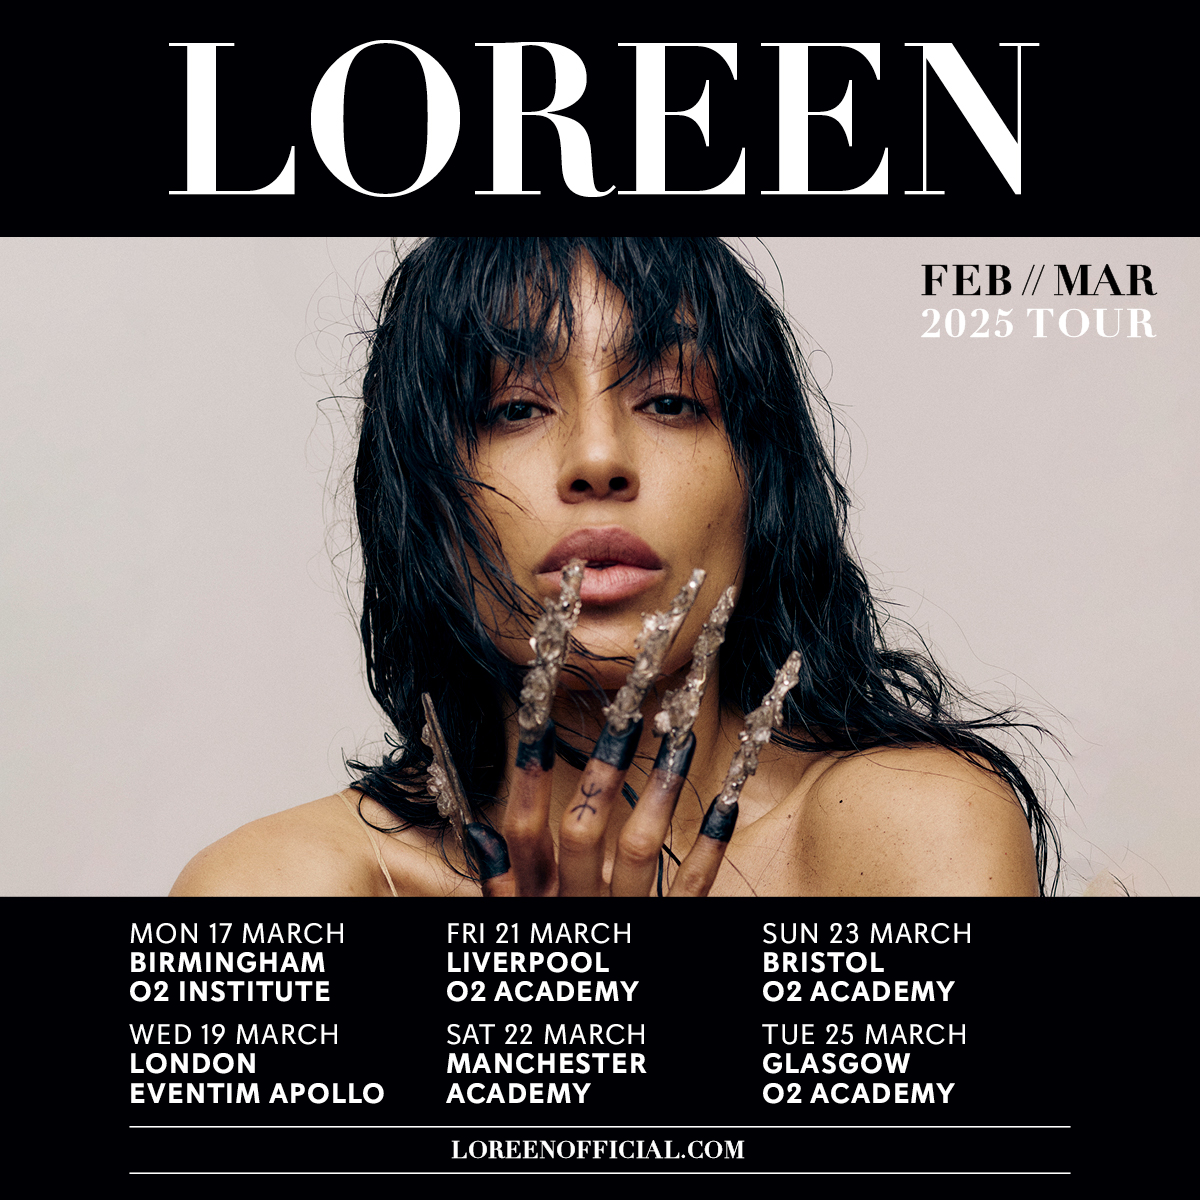 The only woman to win the iconic song contest twice, with “Euphoria” in 2012 and “Tattoo” in 2023, @LOREEN_TALHAOUI is coming to #O2AcademyBristol on Sun 23 Mar. Get your Priority Tickets from 9am on Wed 8 May 👉 amg-venues.com/mfk750RyaGJ #O2Priority #Loreen